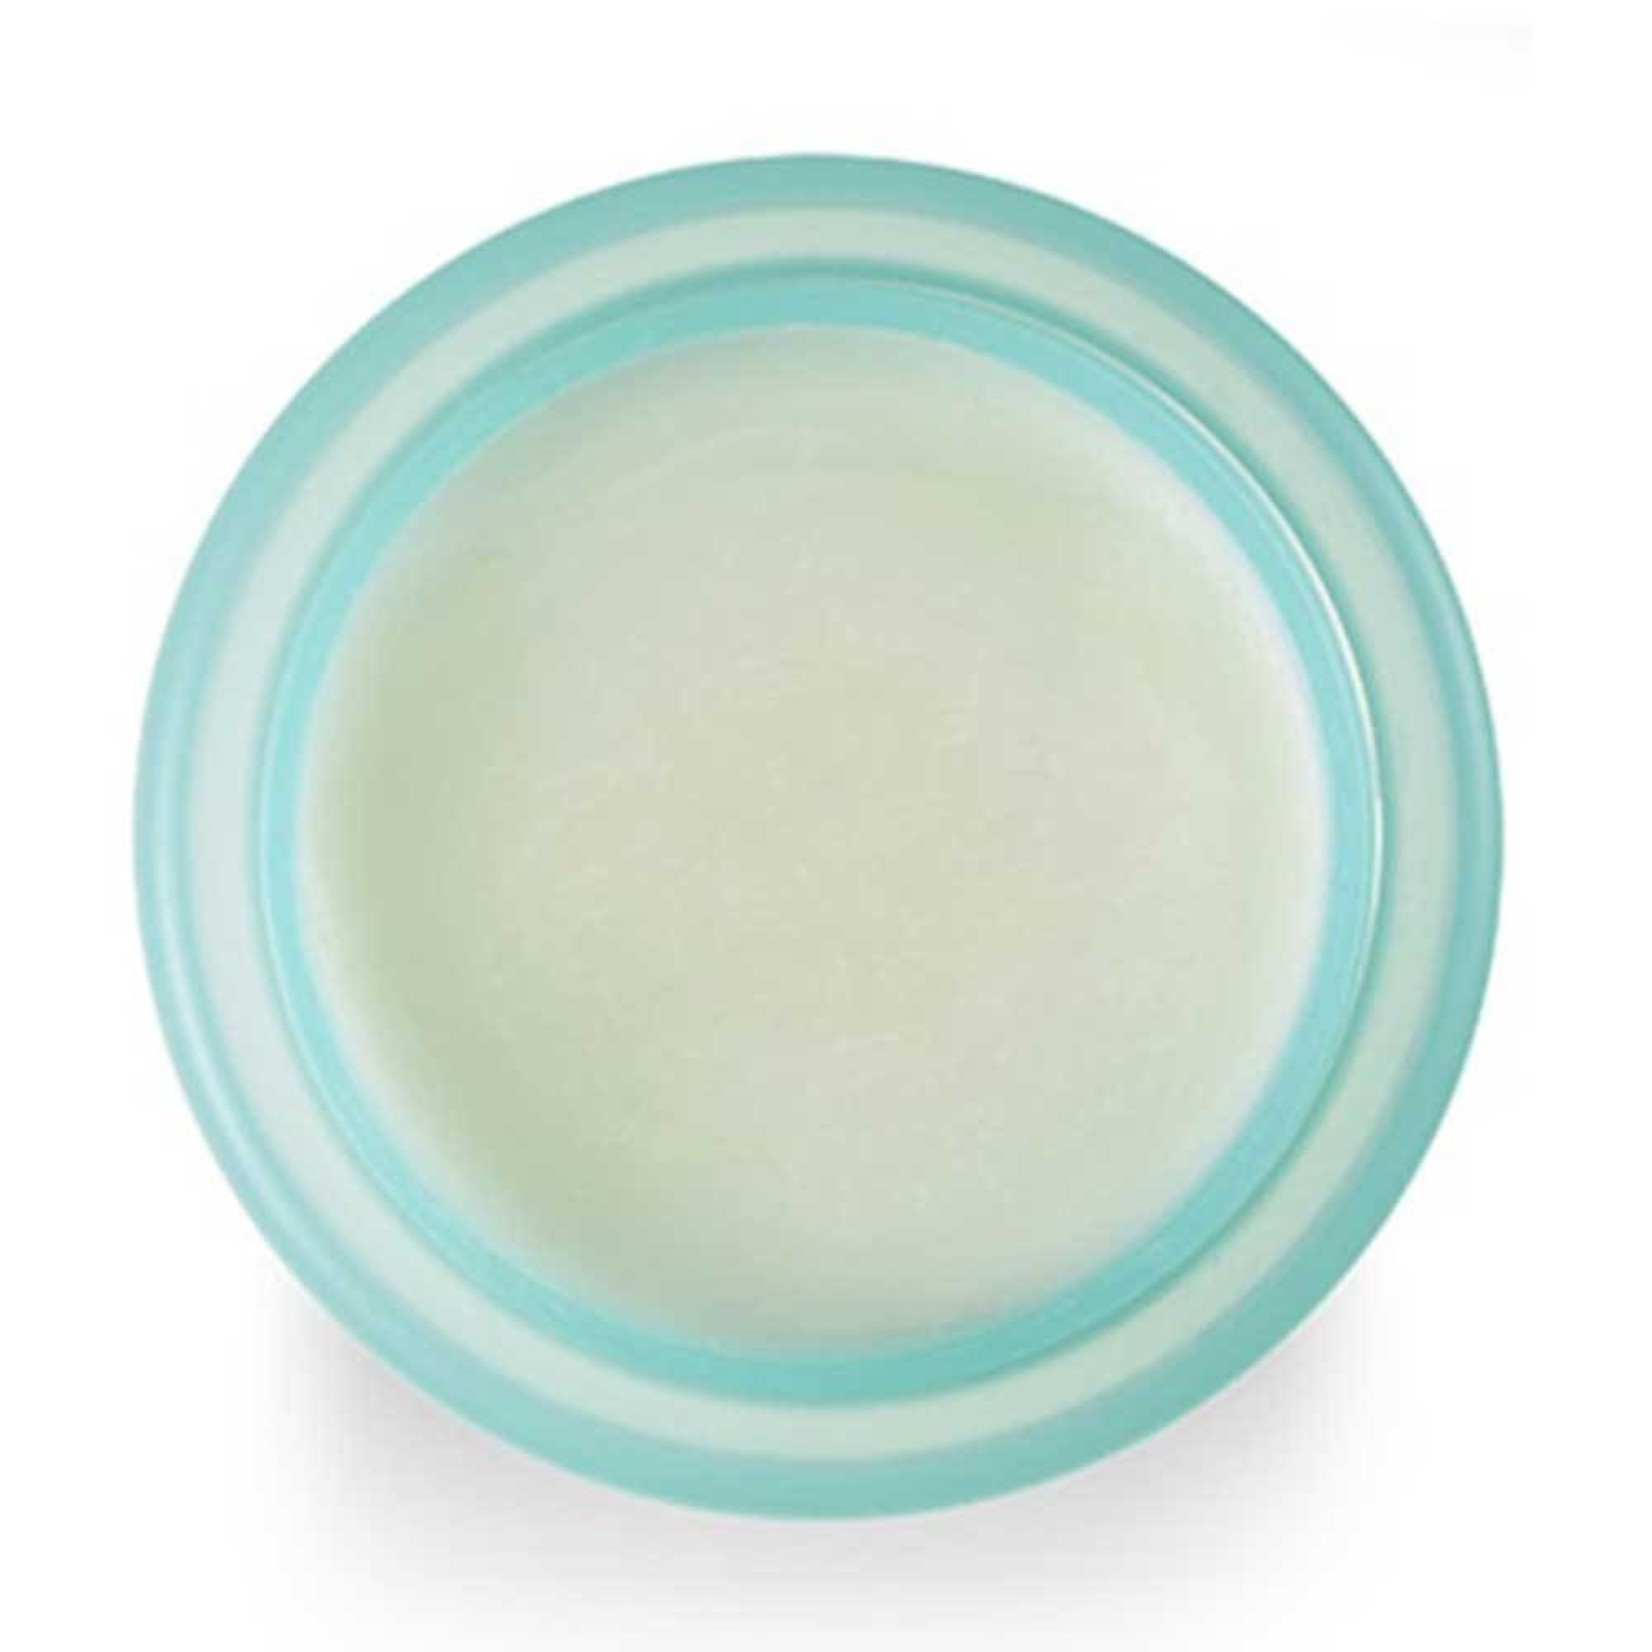 Banila Co Clean It Zero Cleansing Balm Revitalizing - Cleansing